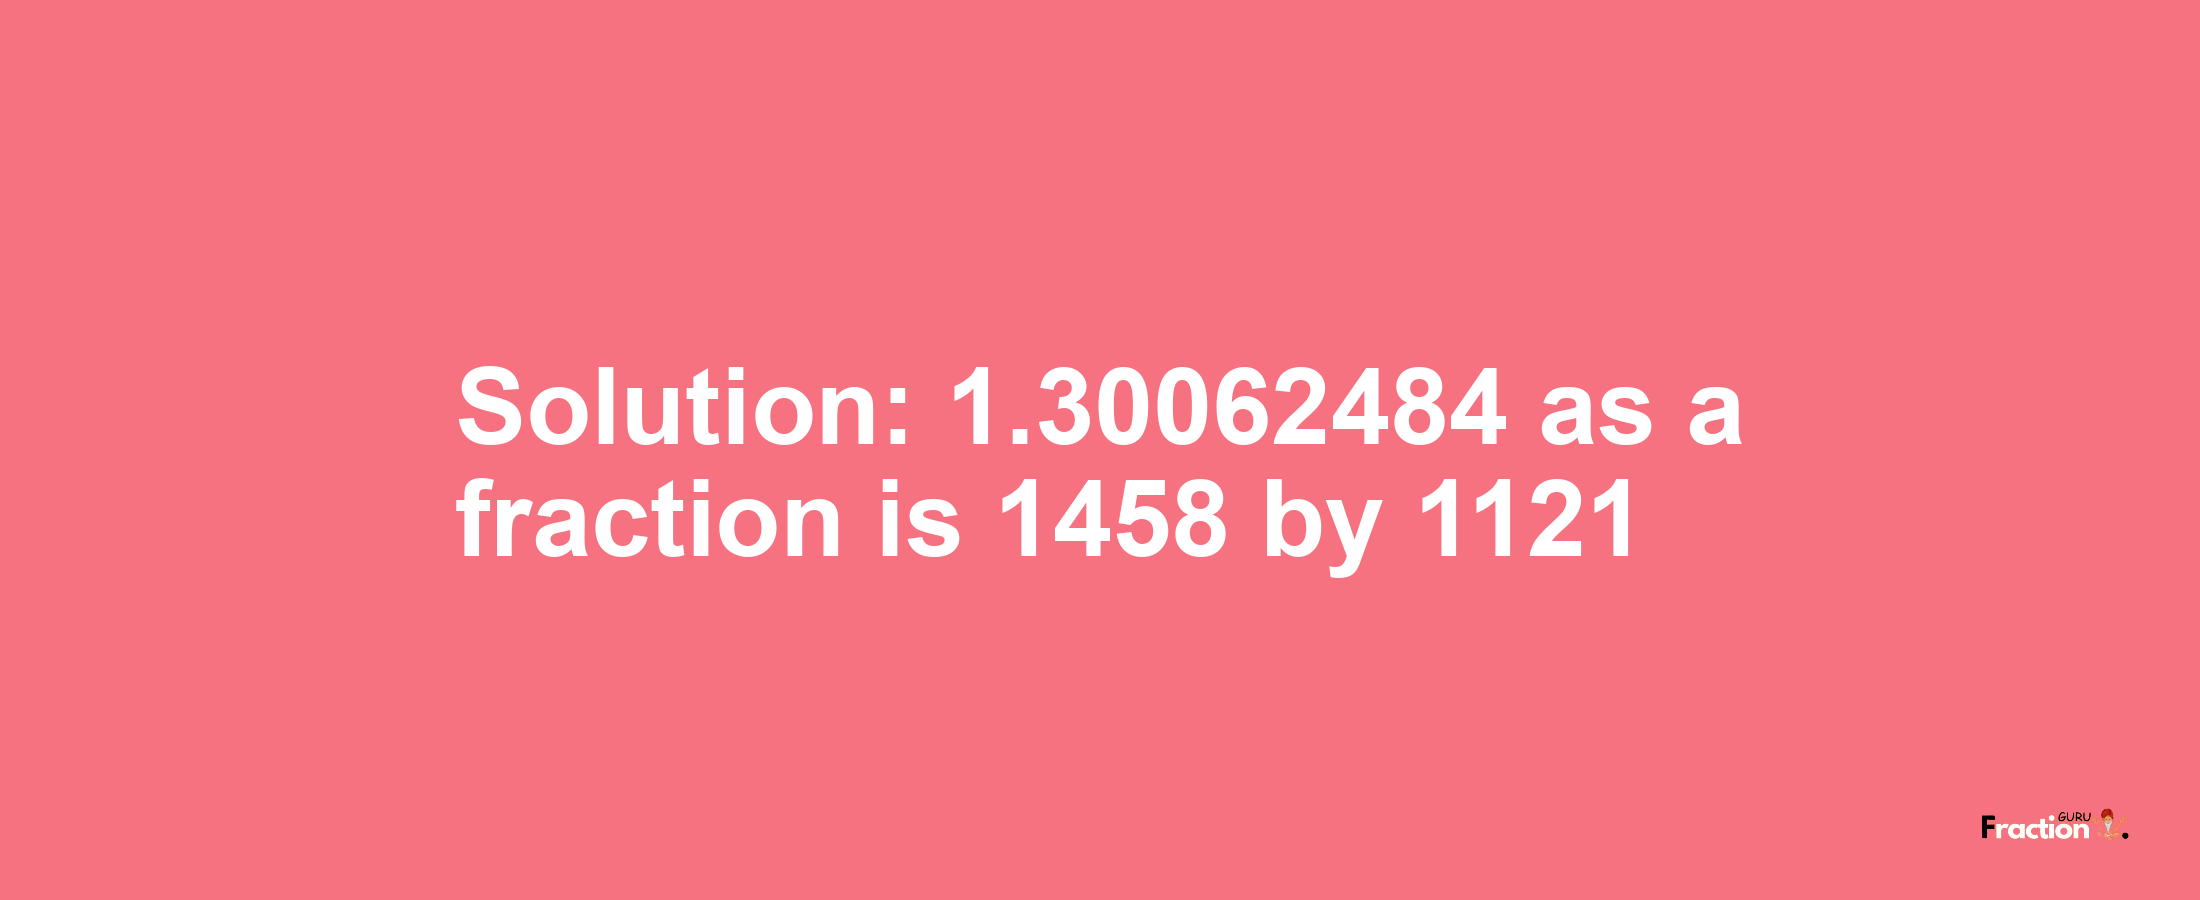 Solution:1.30062484 as a fraction is 1458/1121